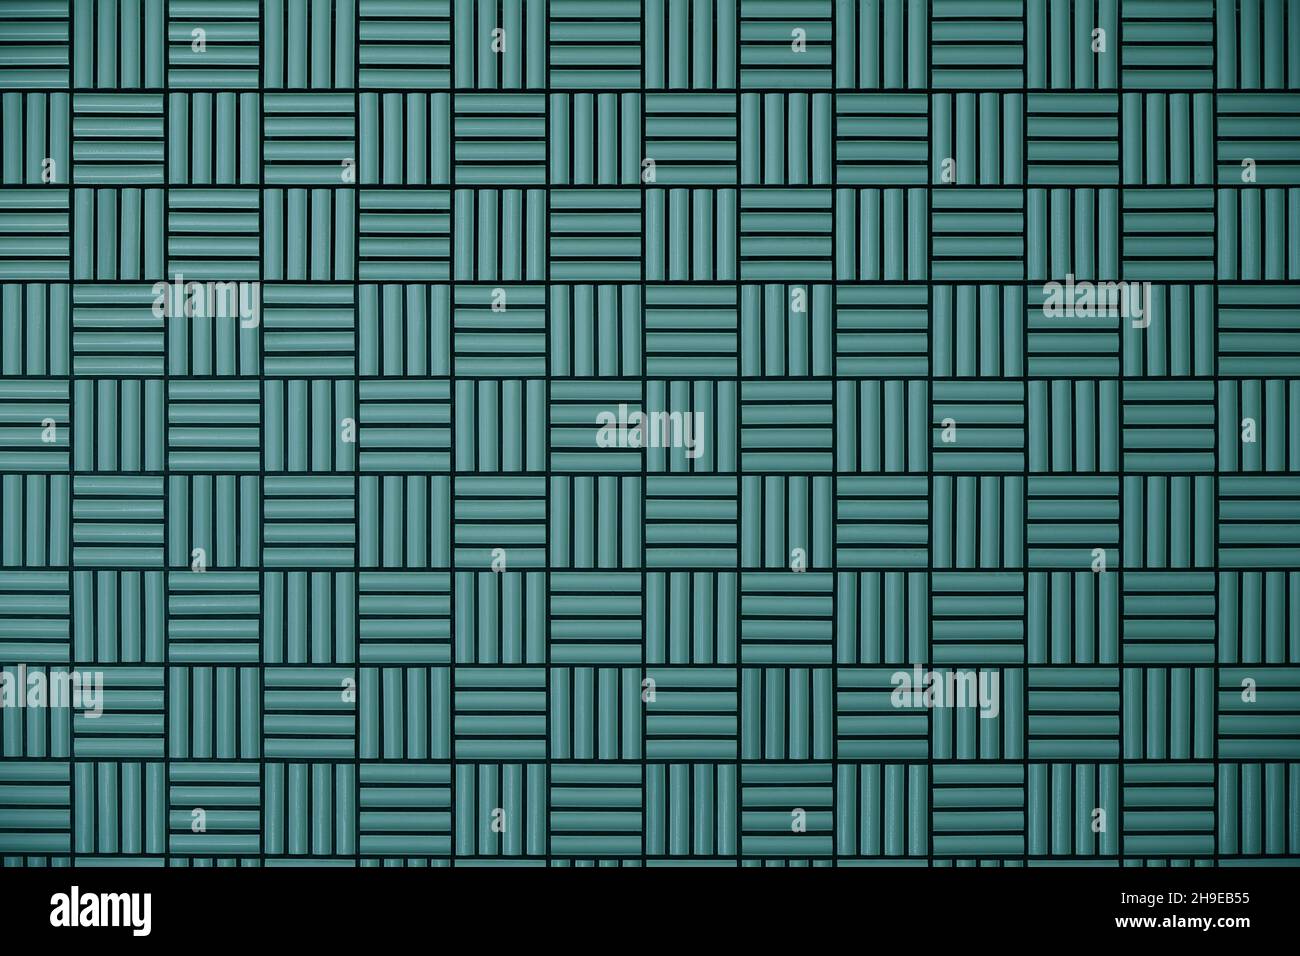 Green tile wall with geometric pattern as background material Stock Photo